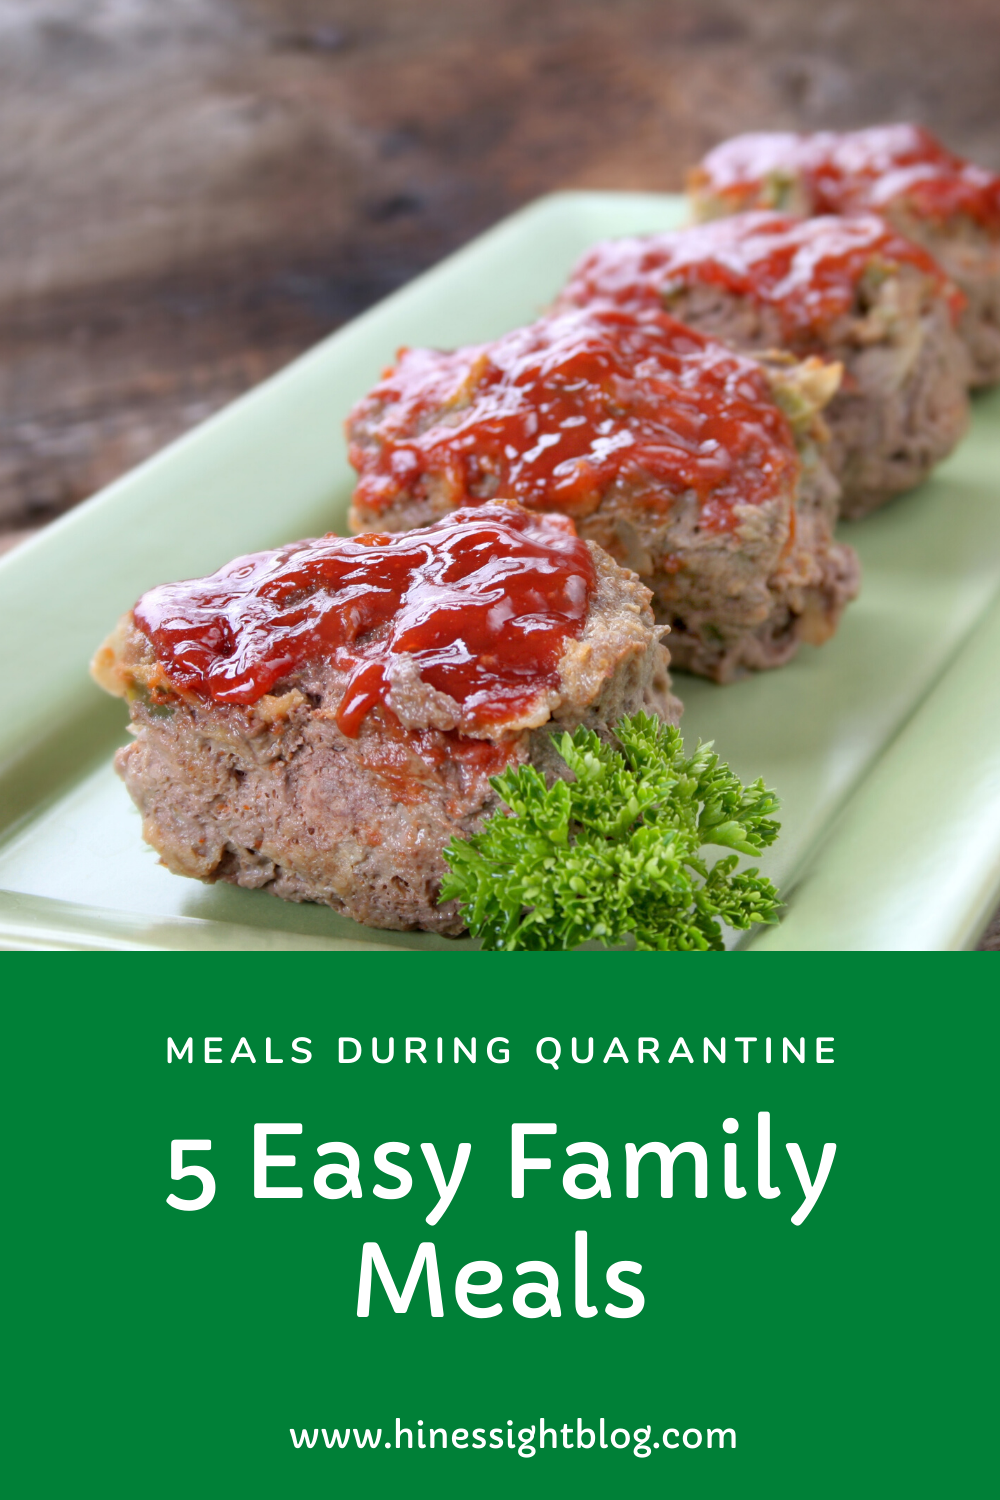 5 Easy Family Meals During COVID-19 Quarantine | Hines-Sight Blog